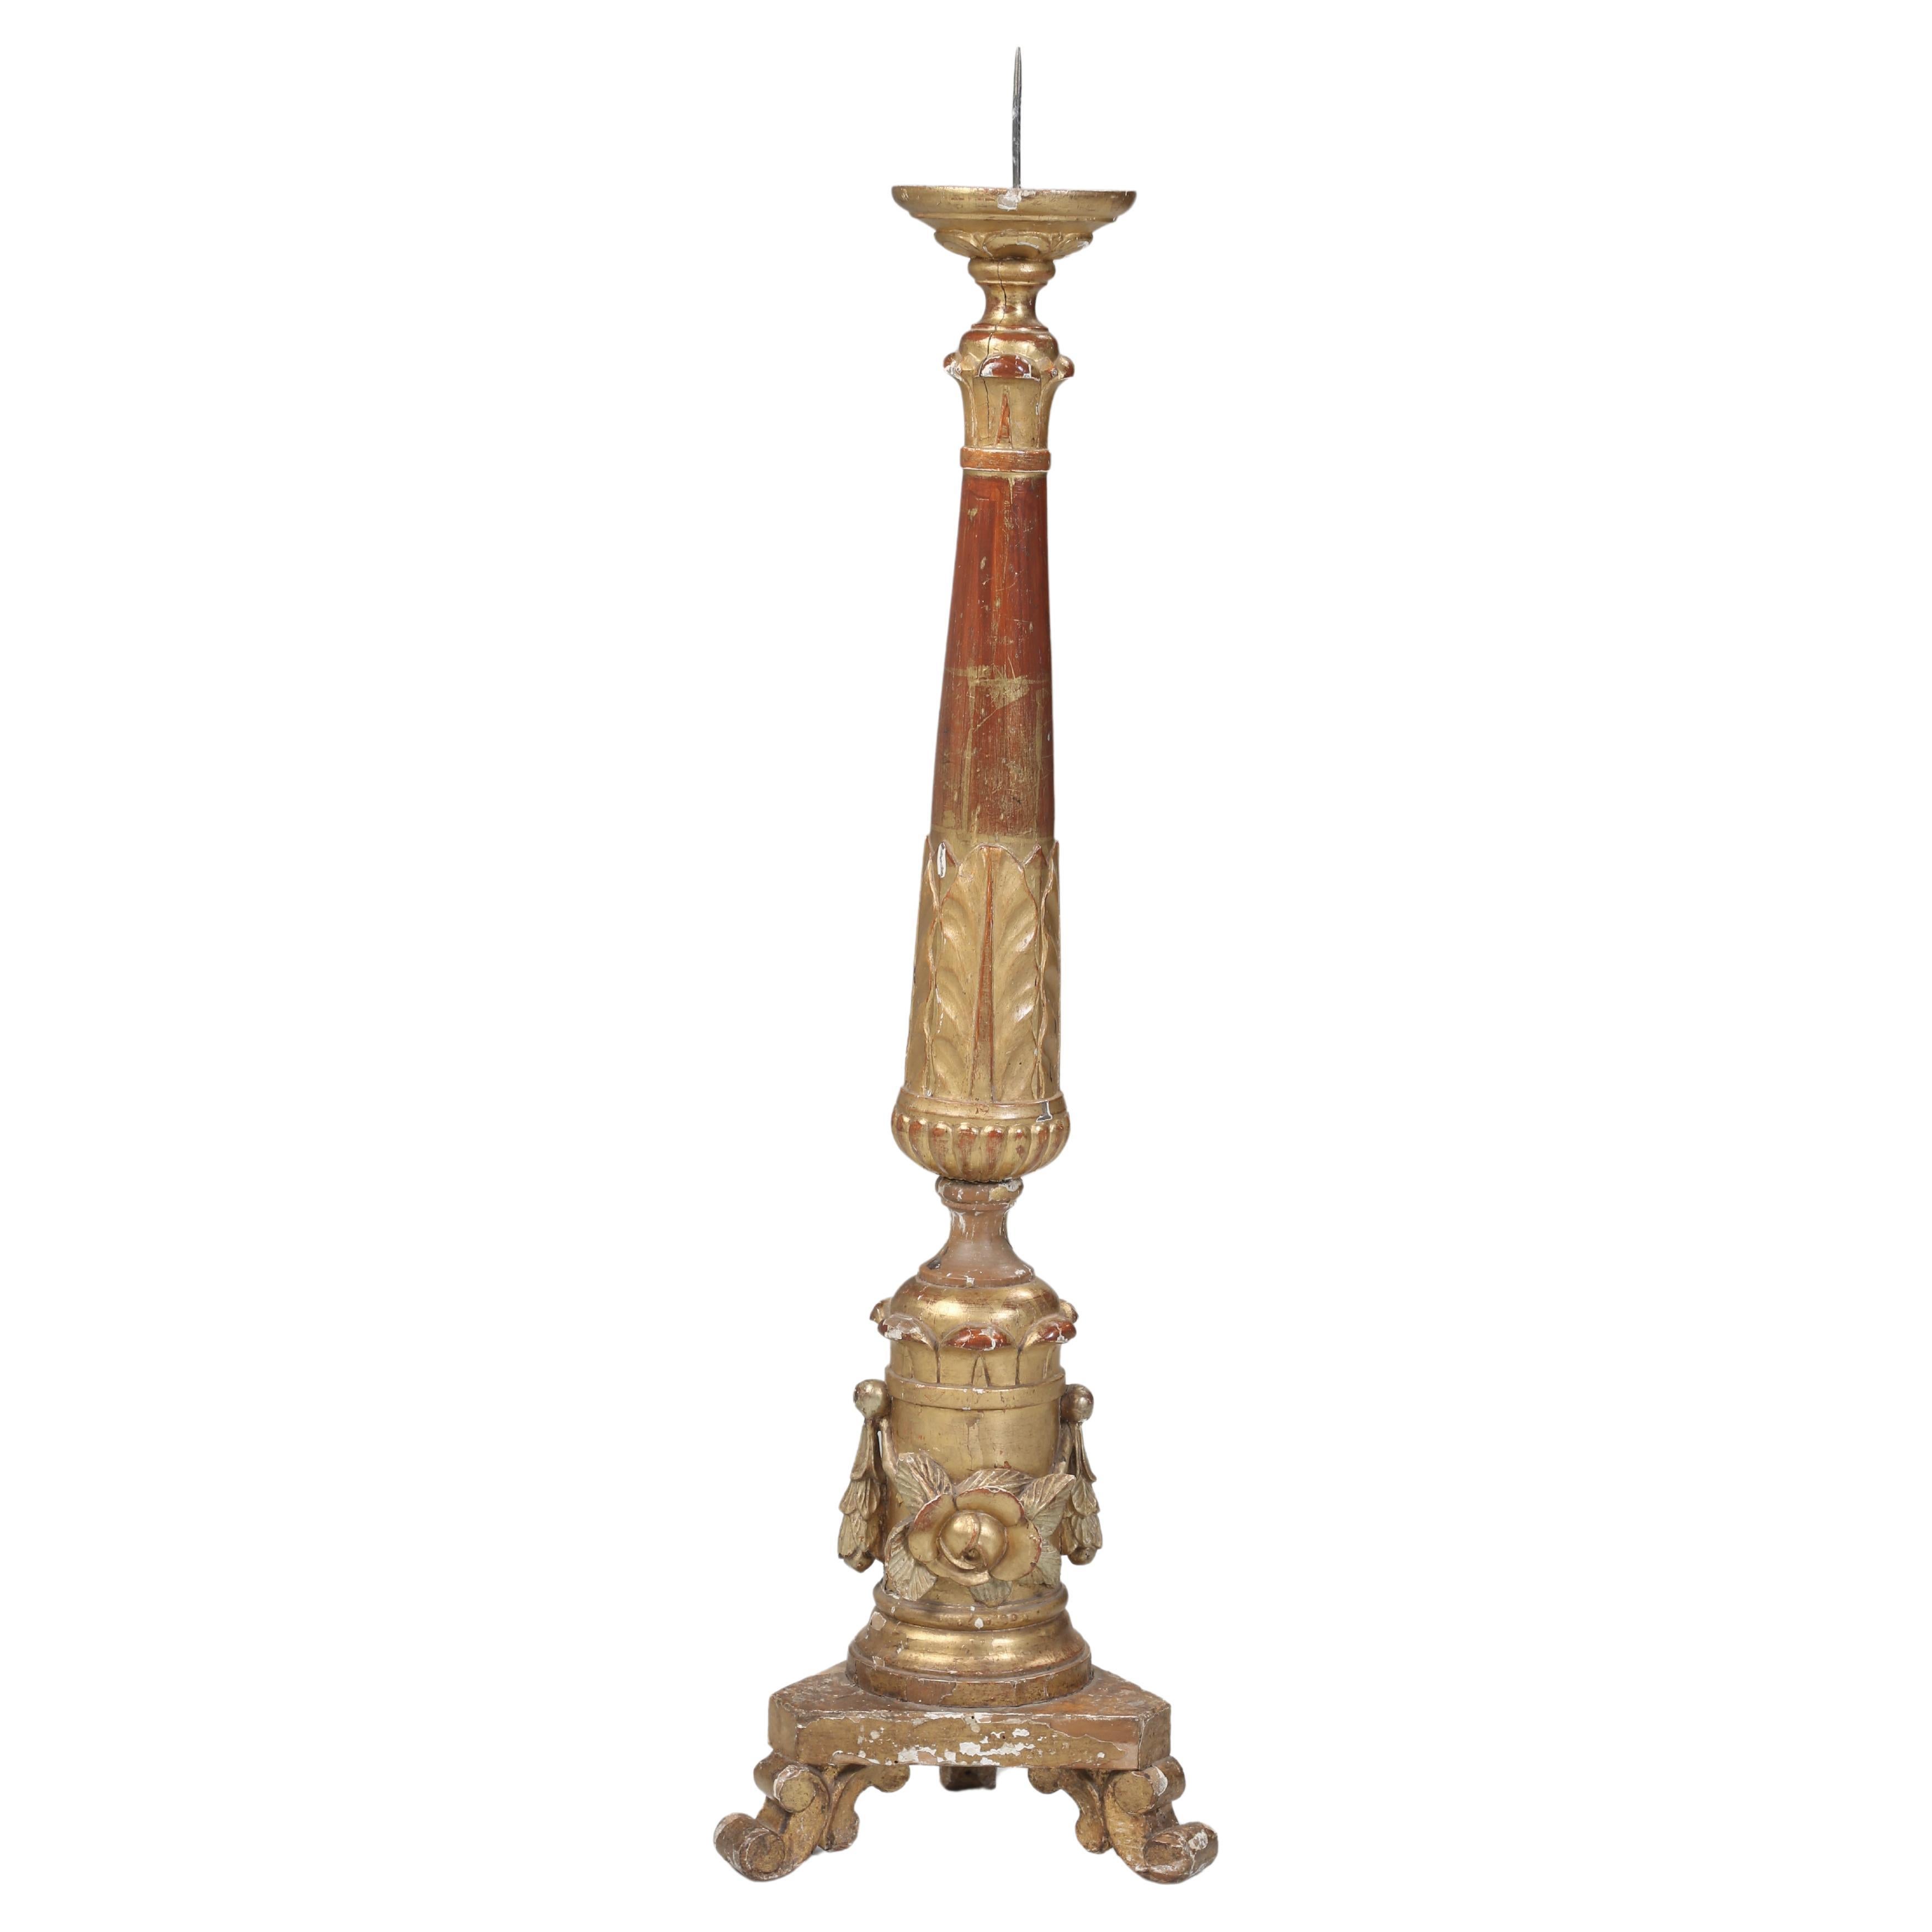 Italian Gilded Altar Candlestick Completely Original and Unrestored c1780-1820